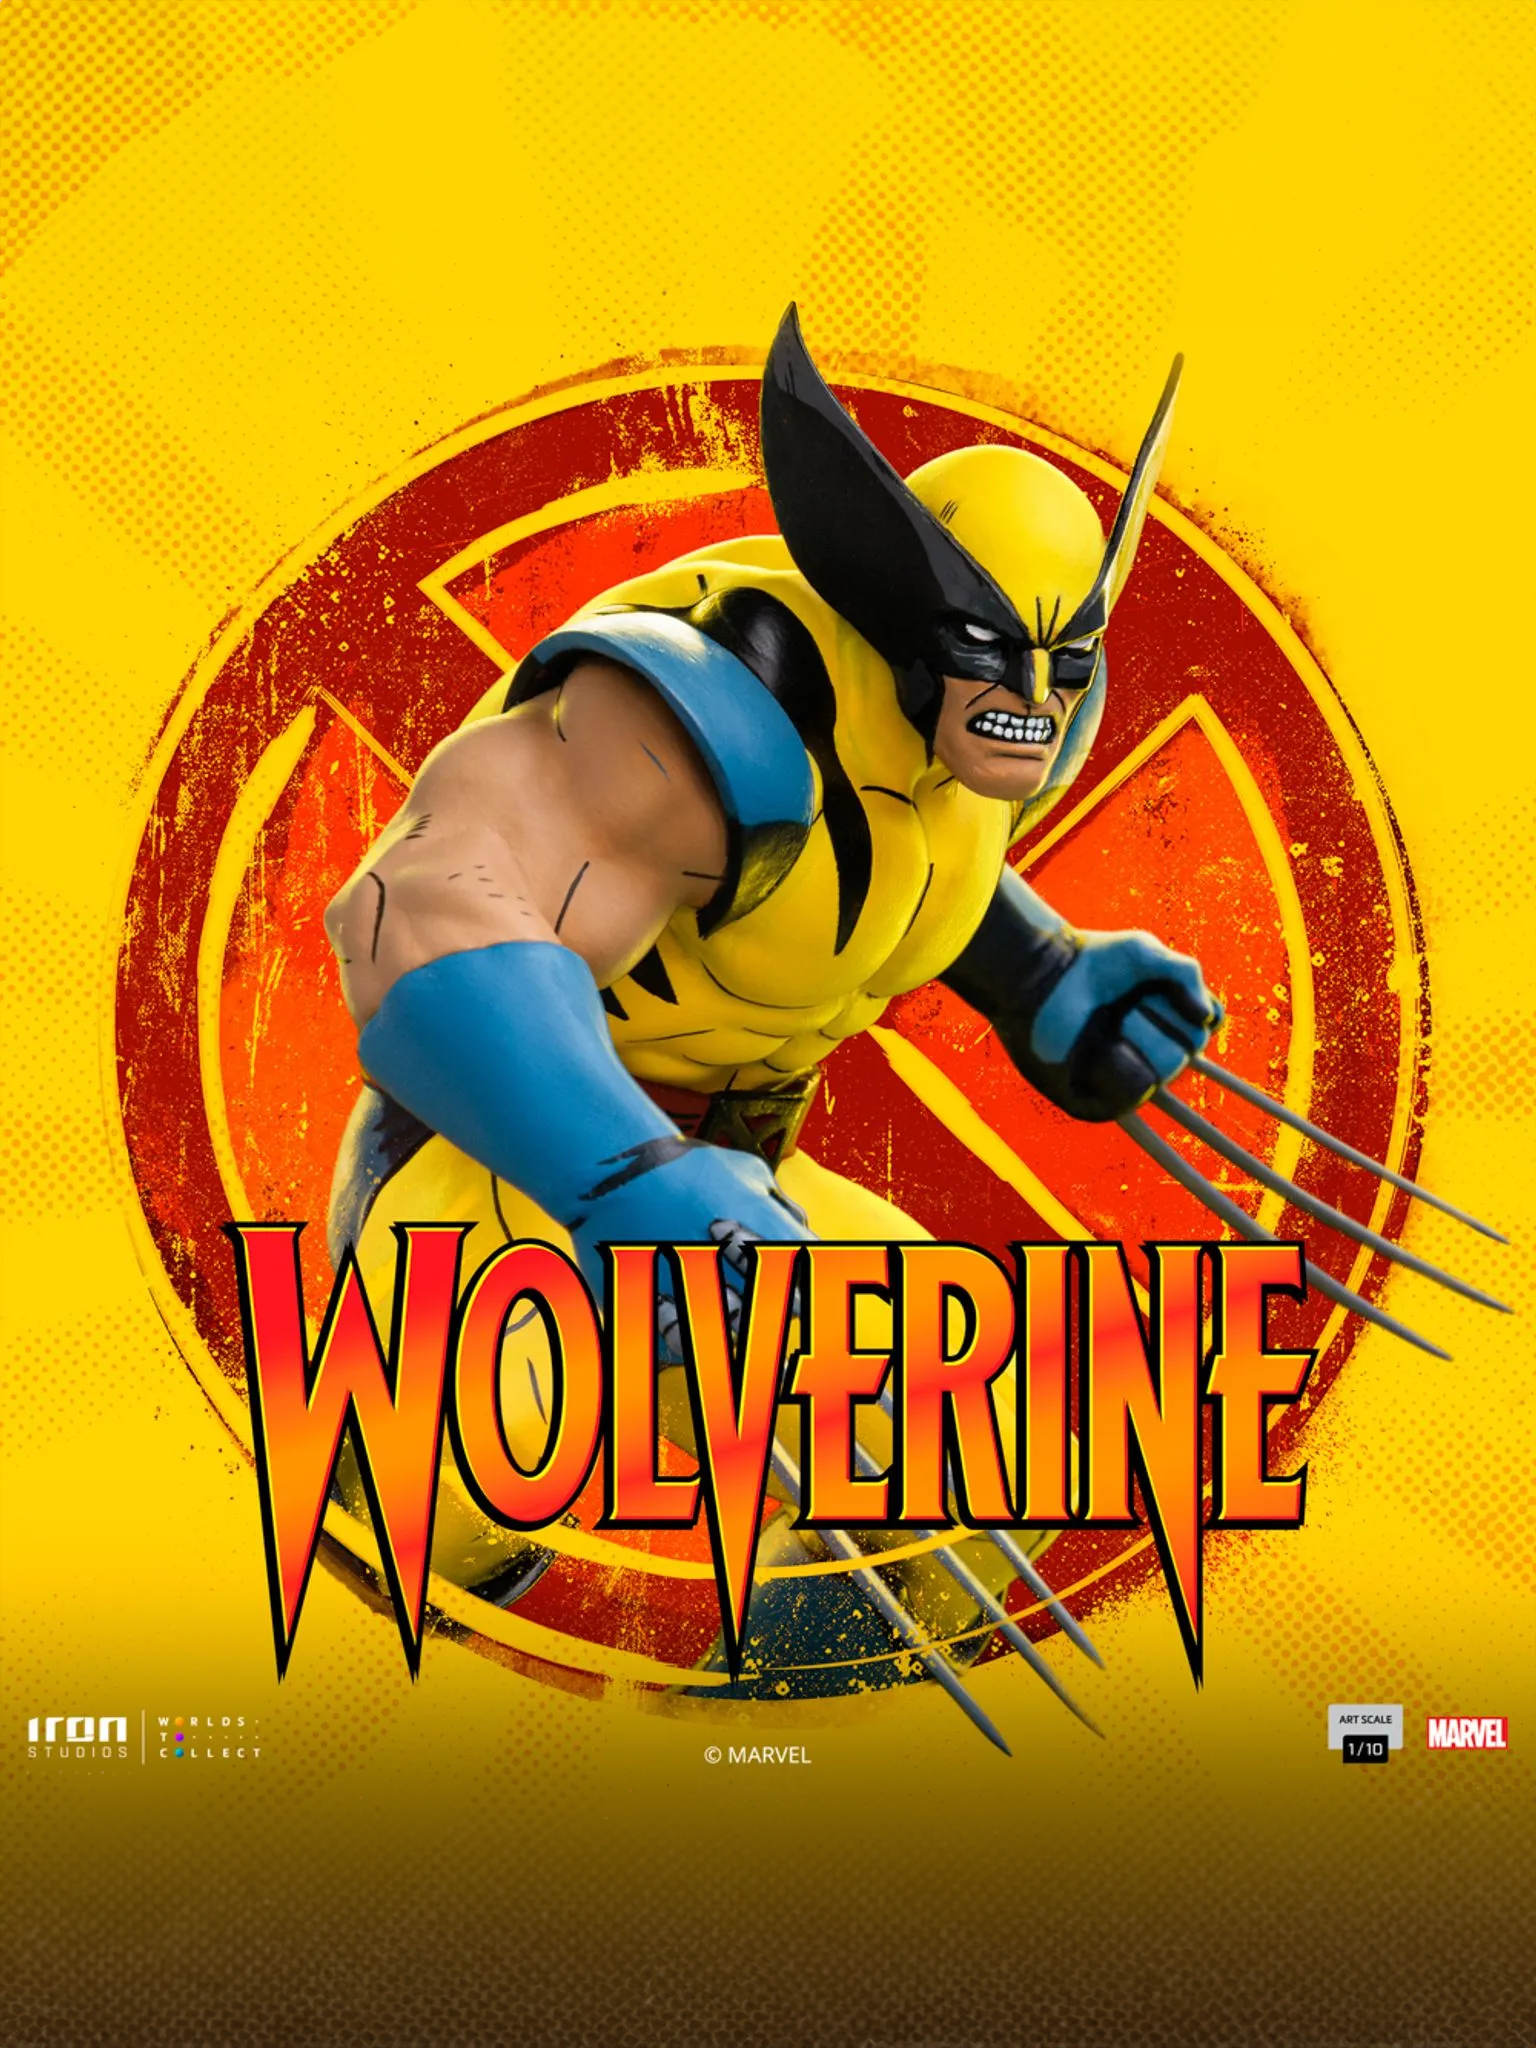 IRON STUDIOS WOLVERINE MARVEL COMICS ART SCALE 1/10 (PRE-ORDER) - Anotoys Collectibles